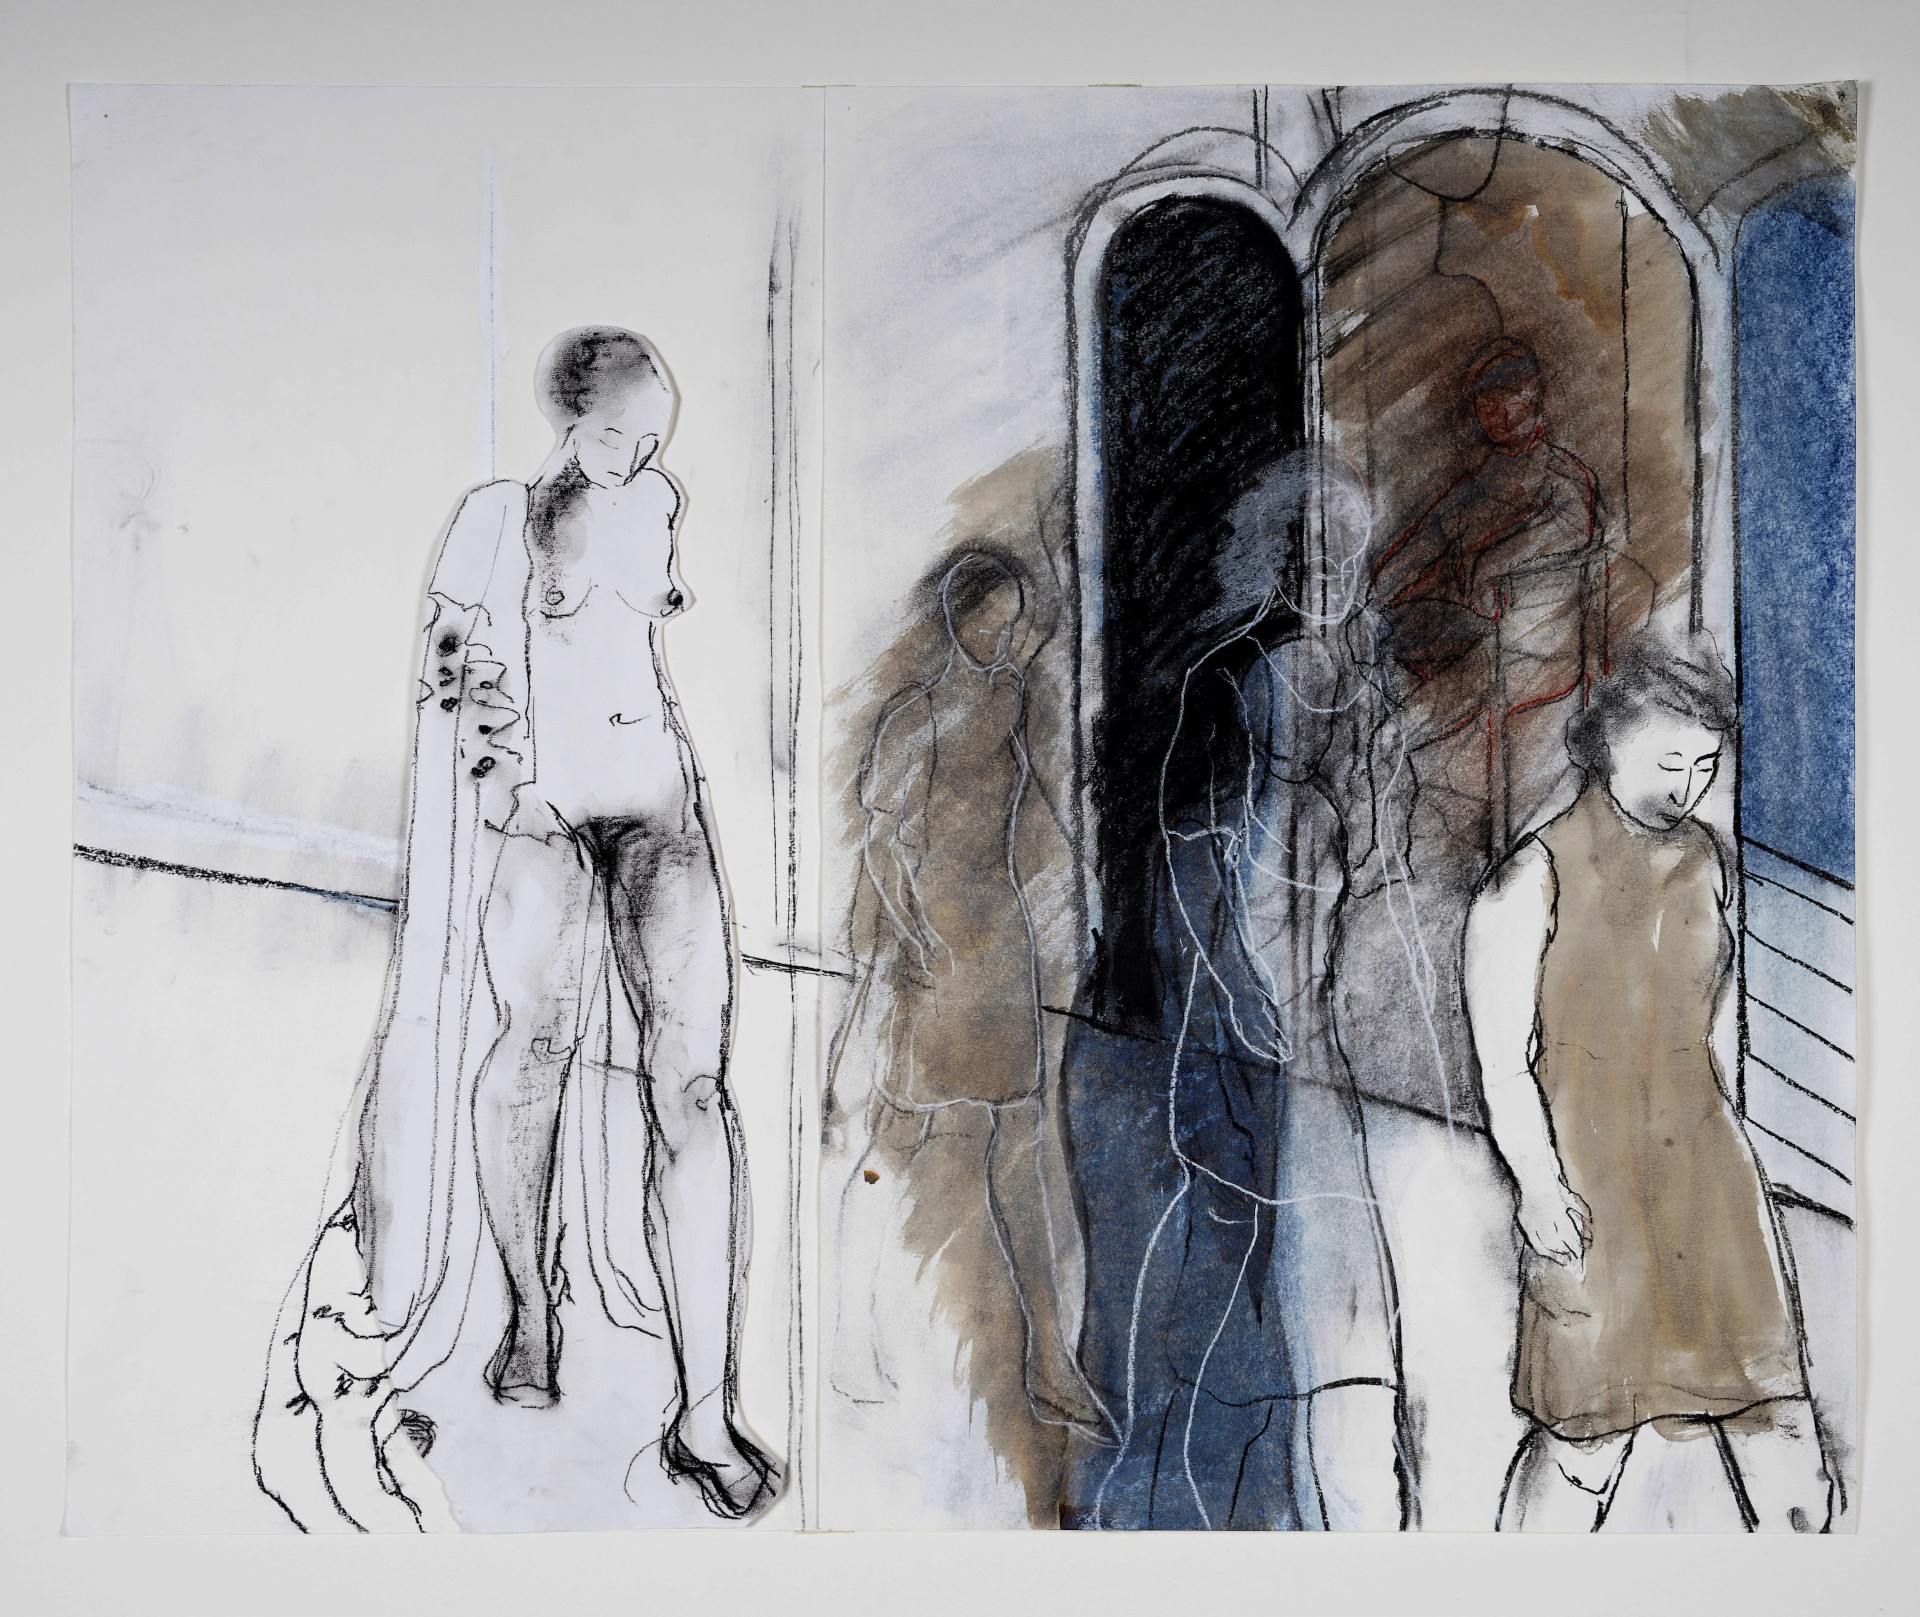 charcoal and pastel drawing on paper showing multiple figures of a woman walking, naked and in different clothes.